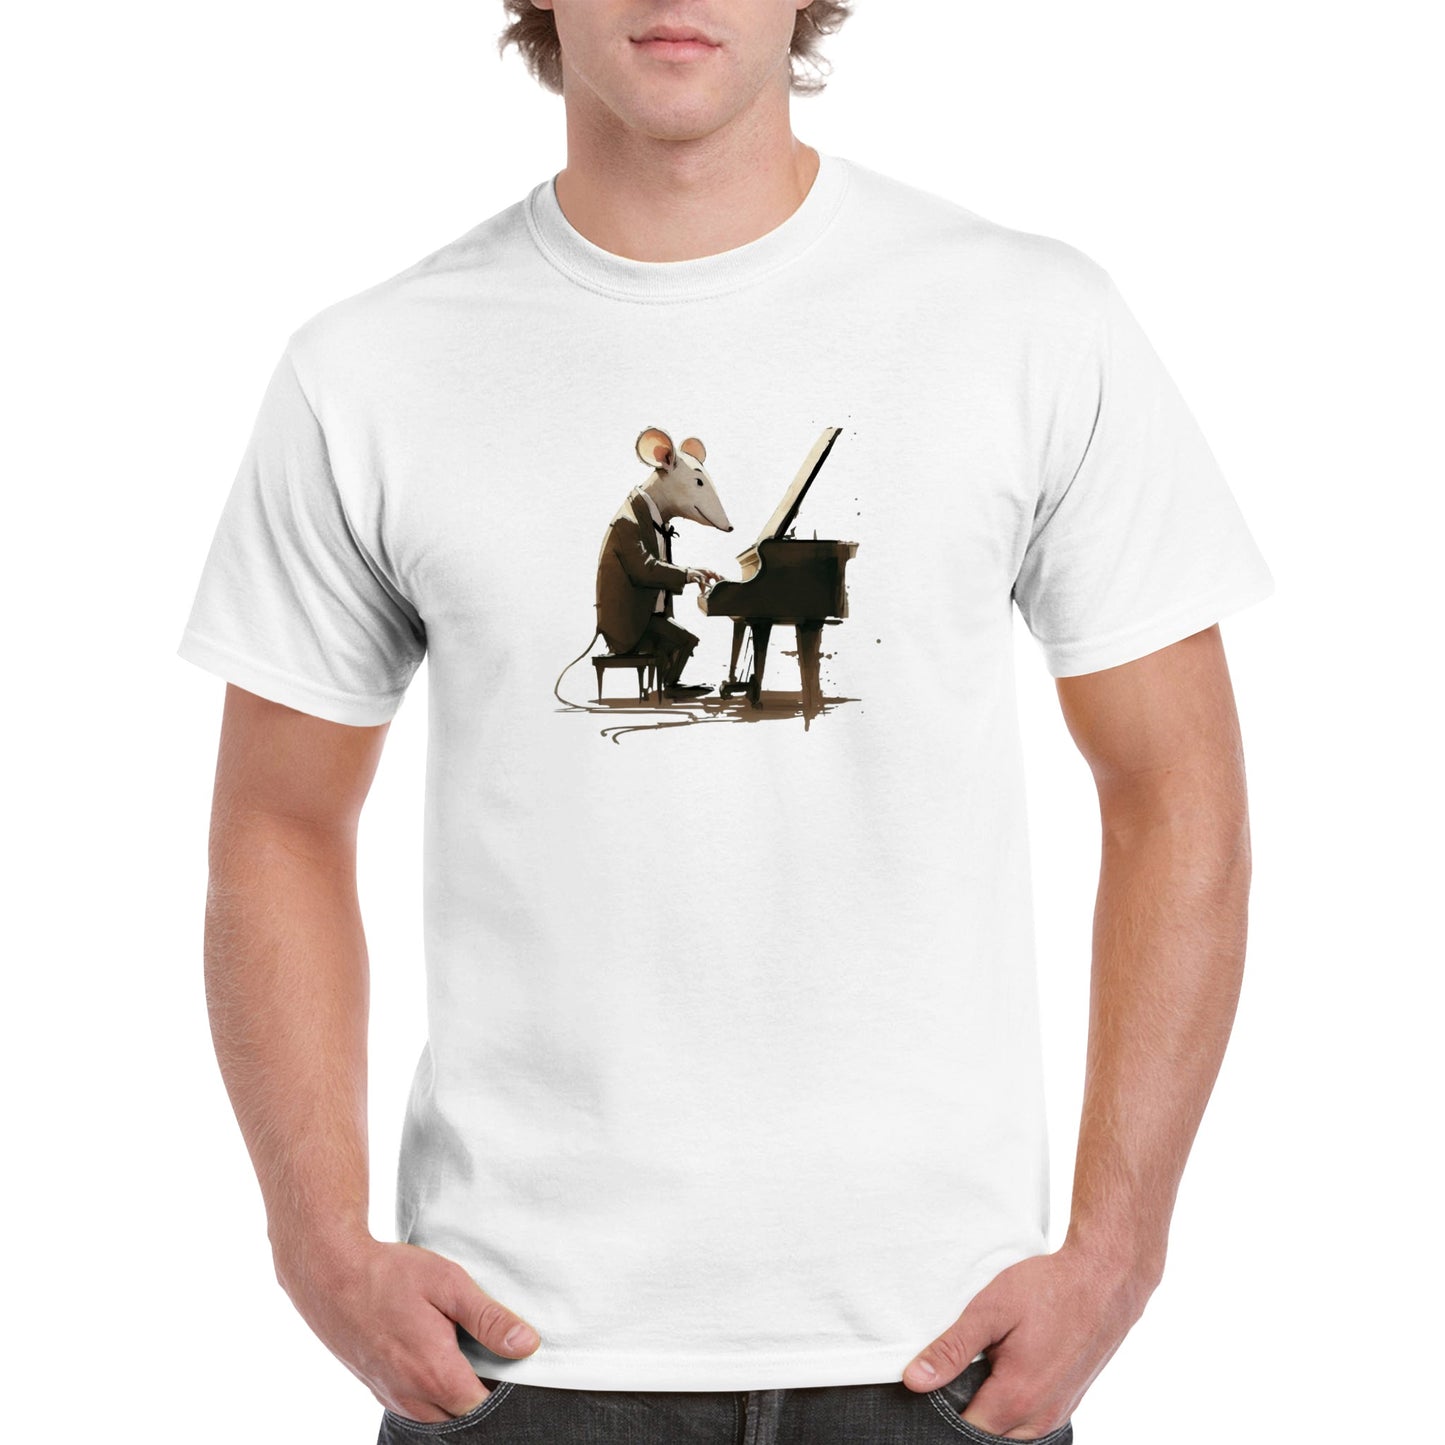 A guy wearing a white t-shirt with a mouse playing a piano print